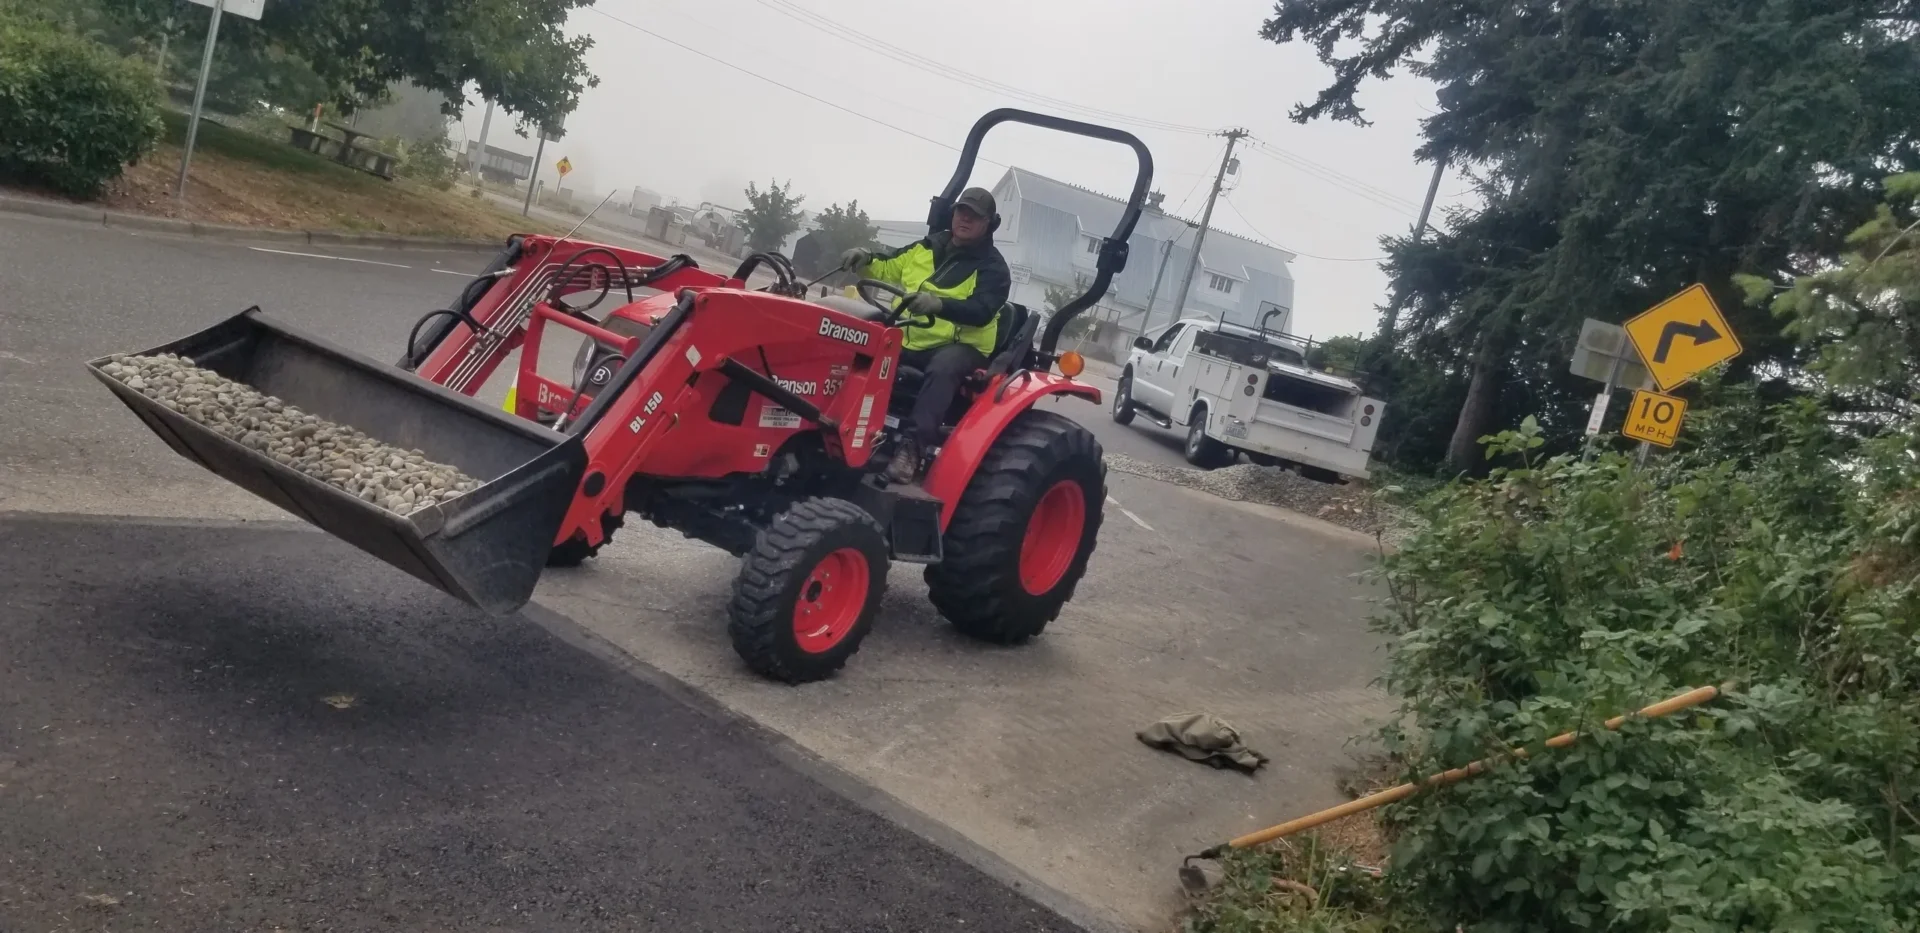 A man riding on the back of a tractor.